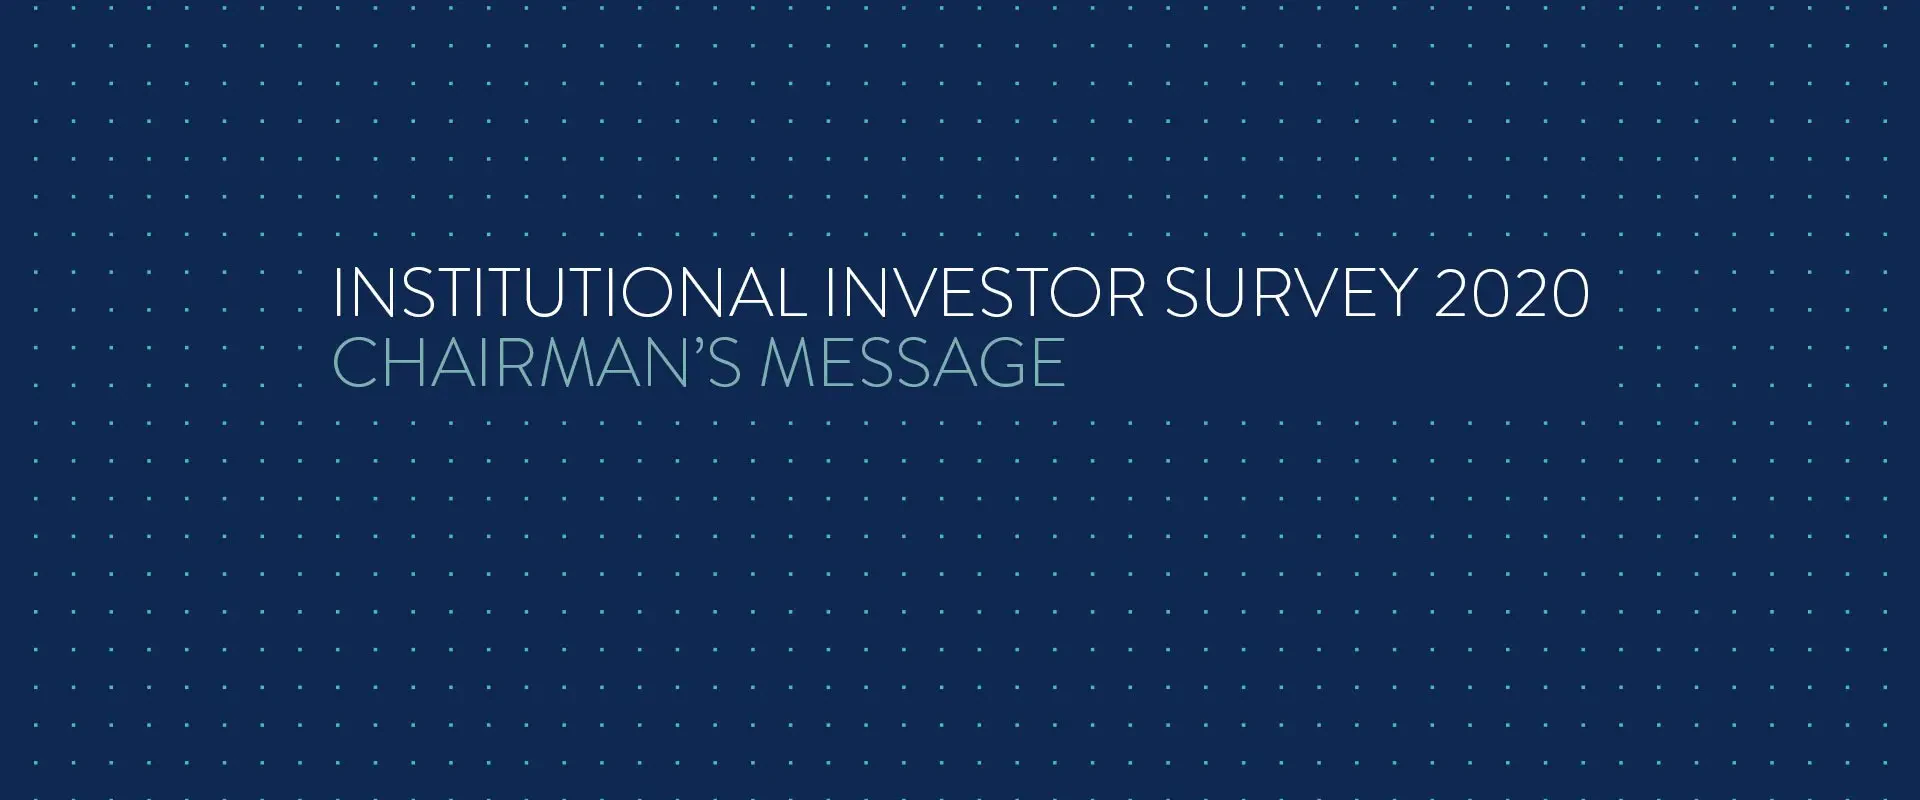 Chairman’s Message: Institutional Investor Survey 2020